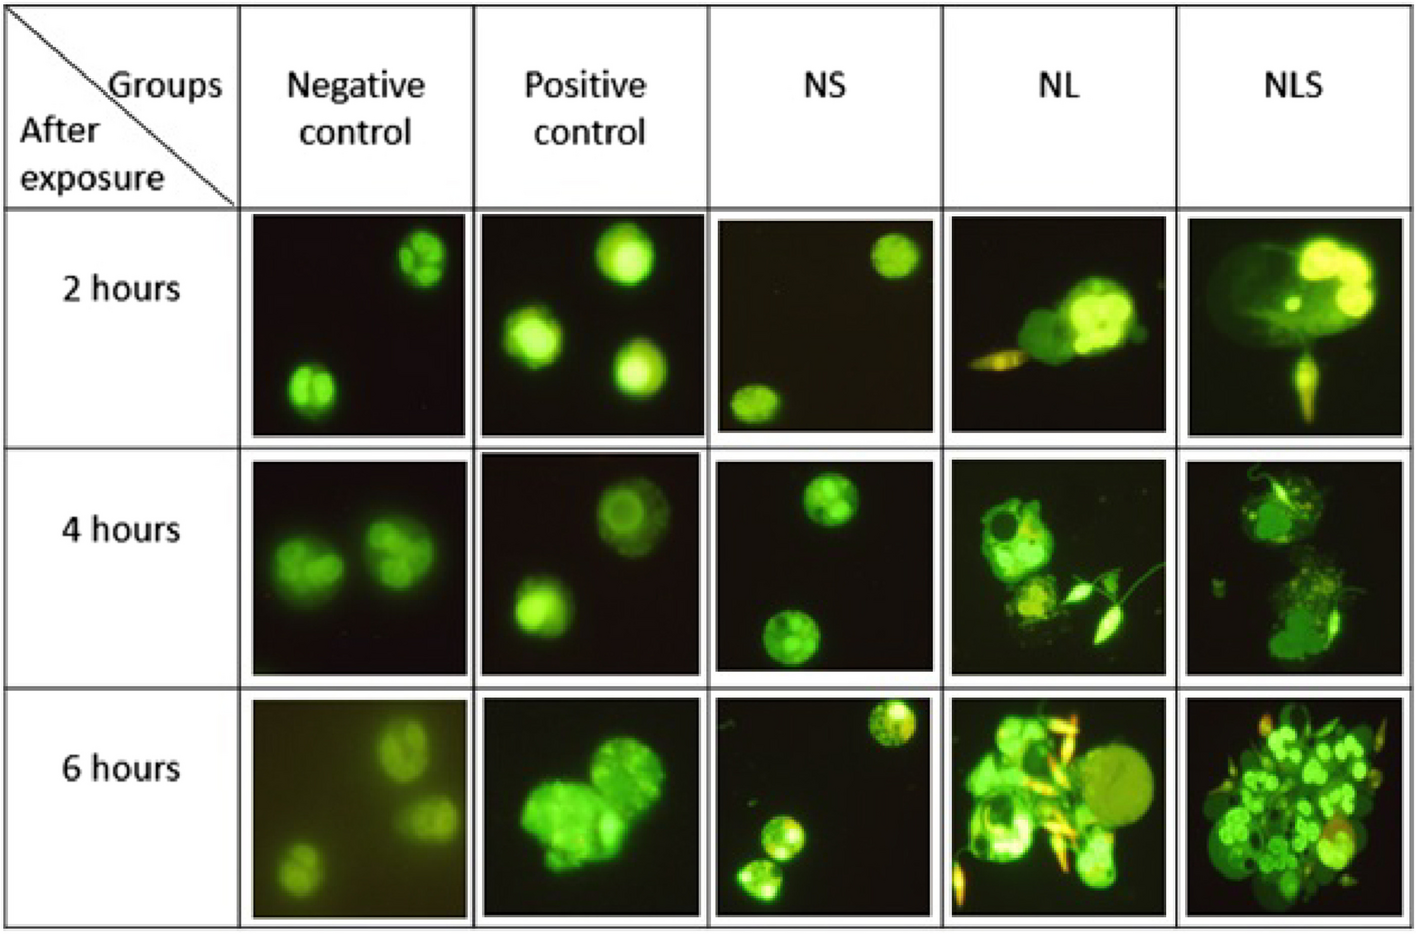 Neutrophil extracellular traps formation: effect of Leishmania major promastigotes and salivary gland homogenates of Phlebotomus papatasi in human neutrophil culture